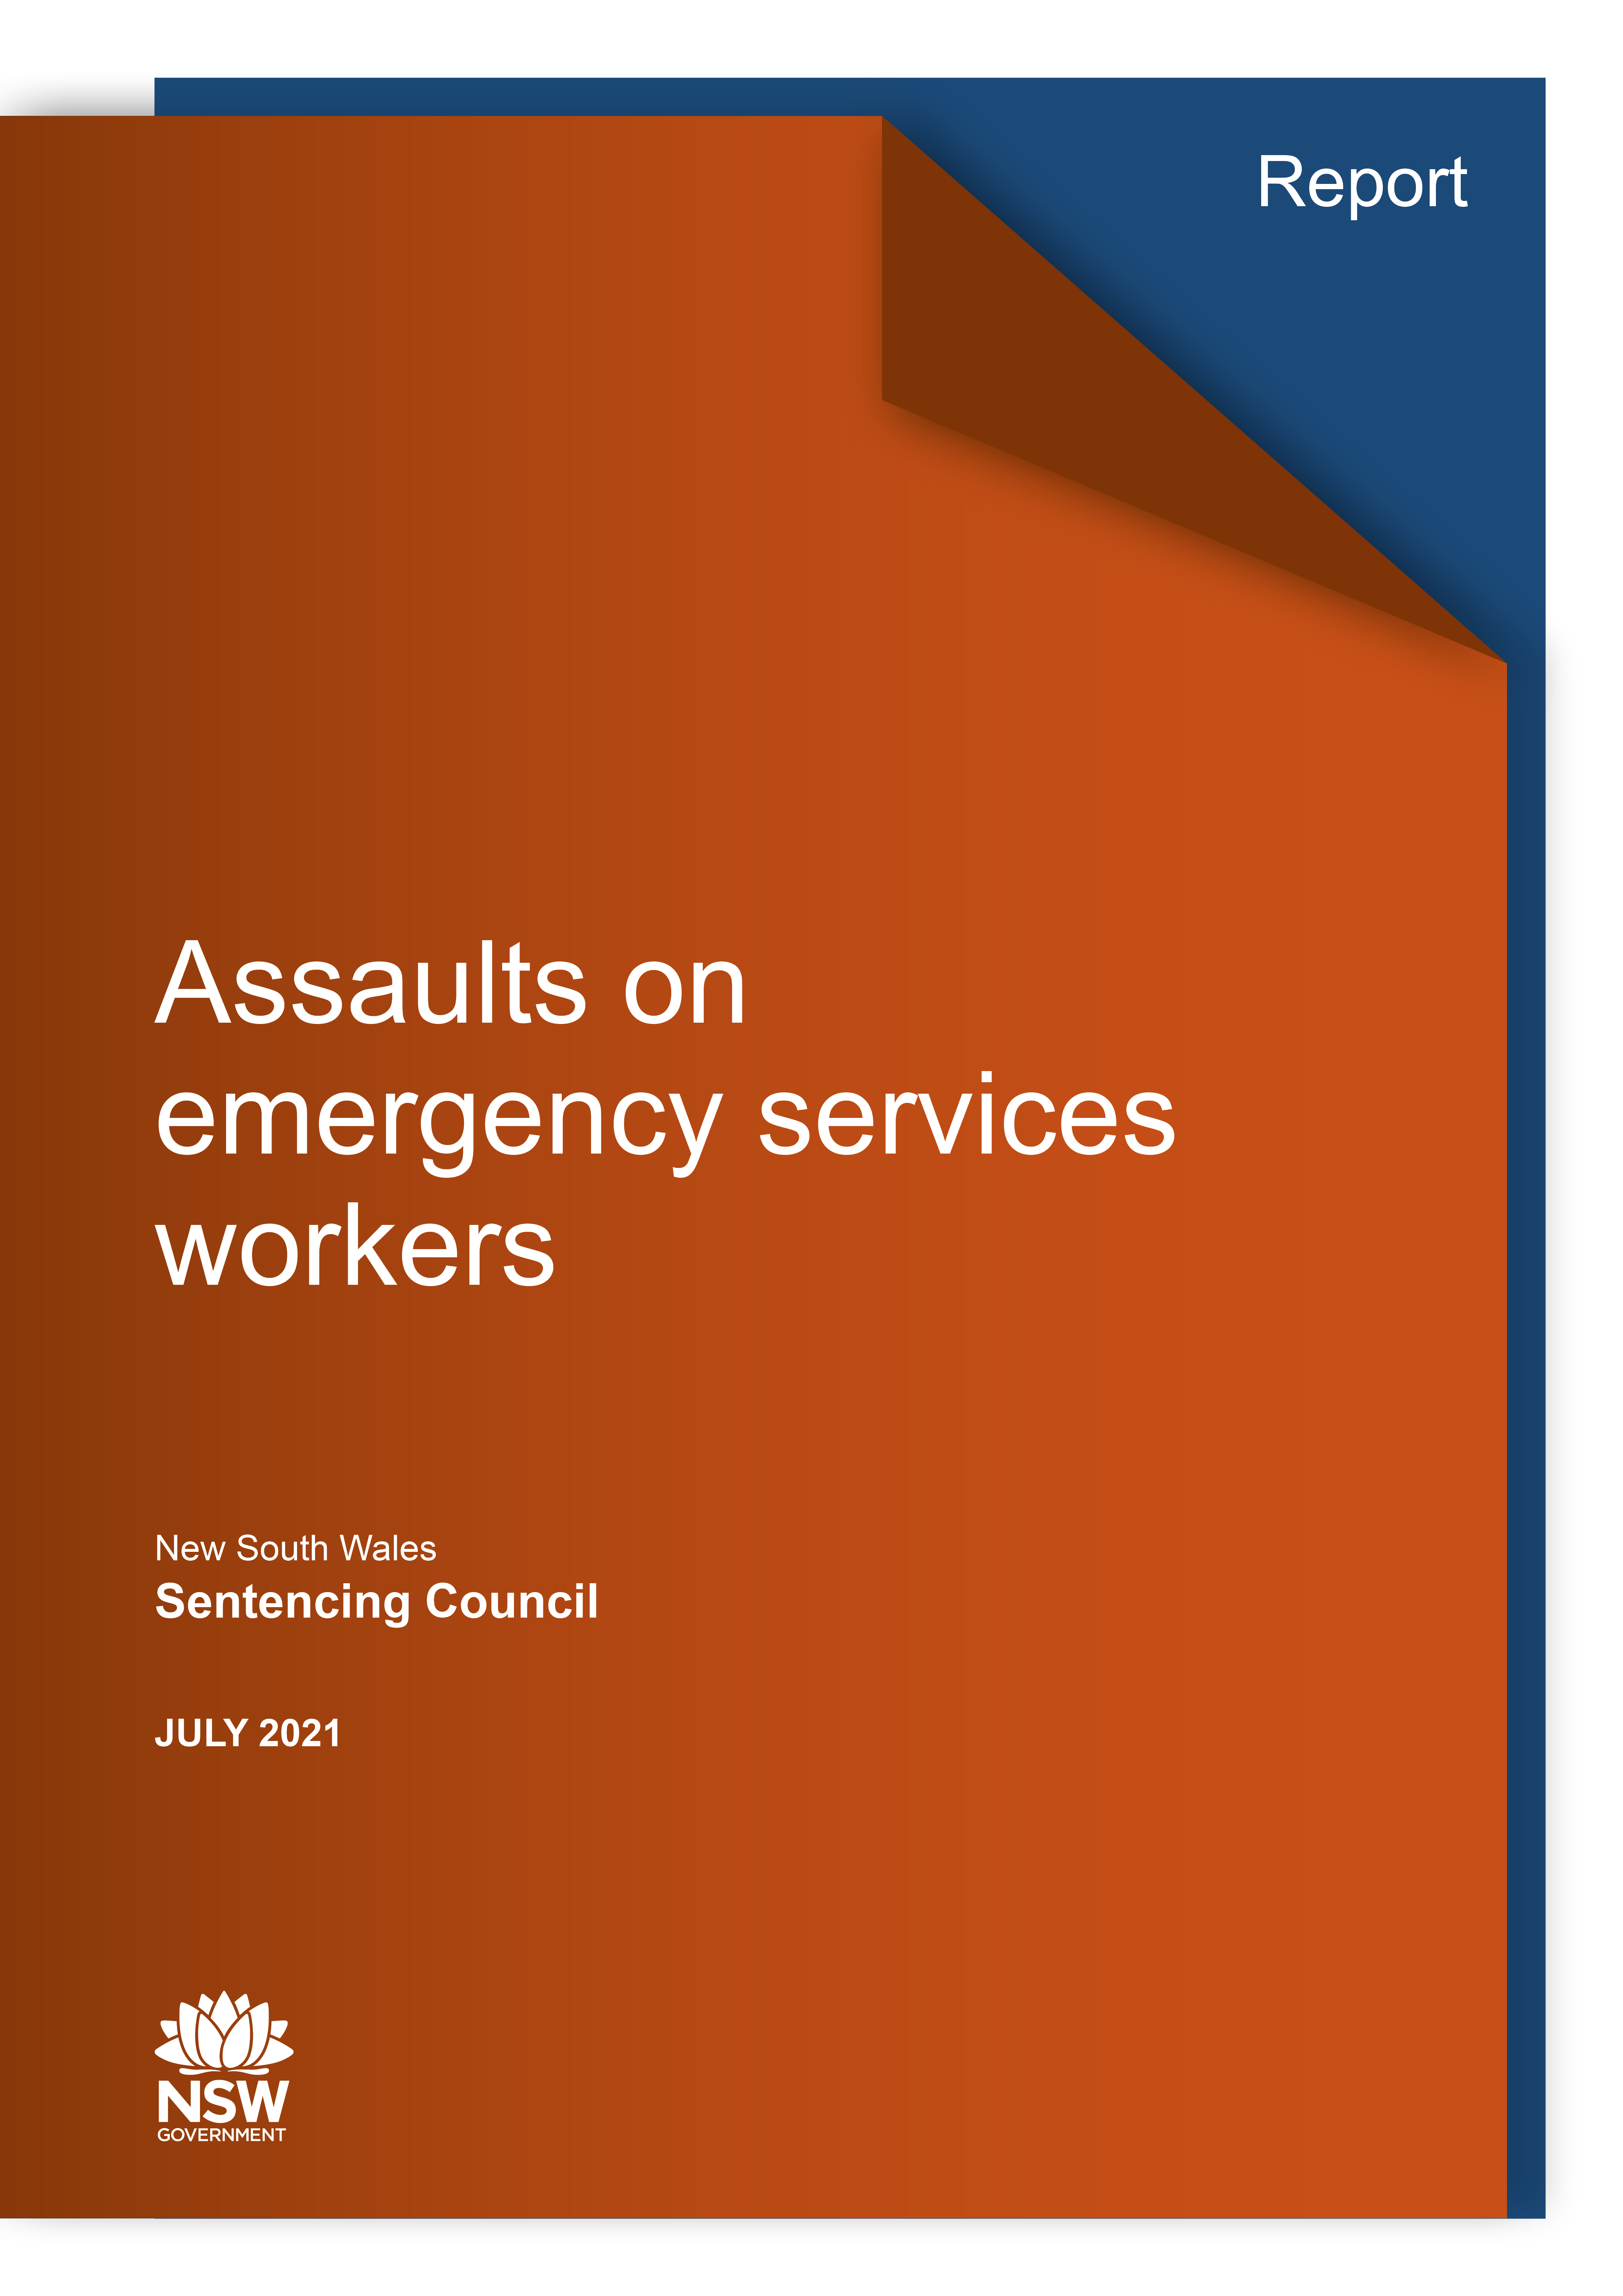 Report on Assaults on emergency services workers